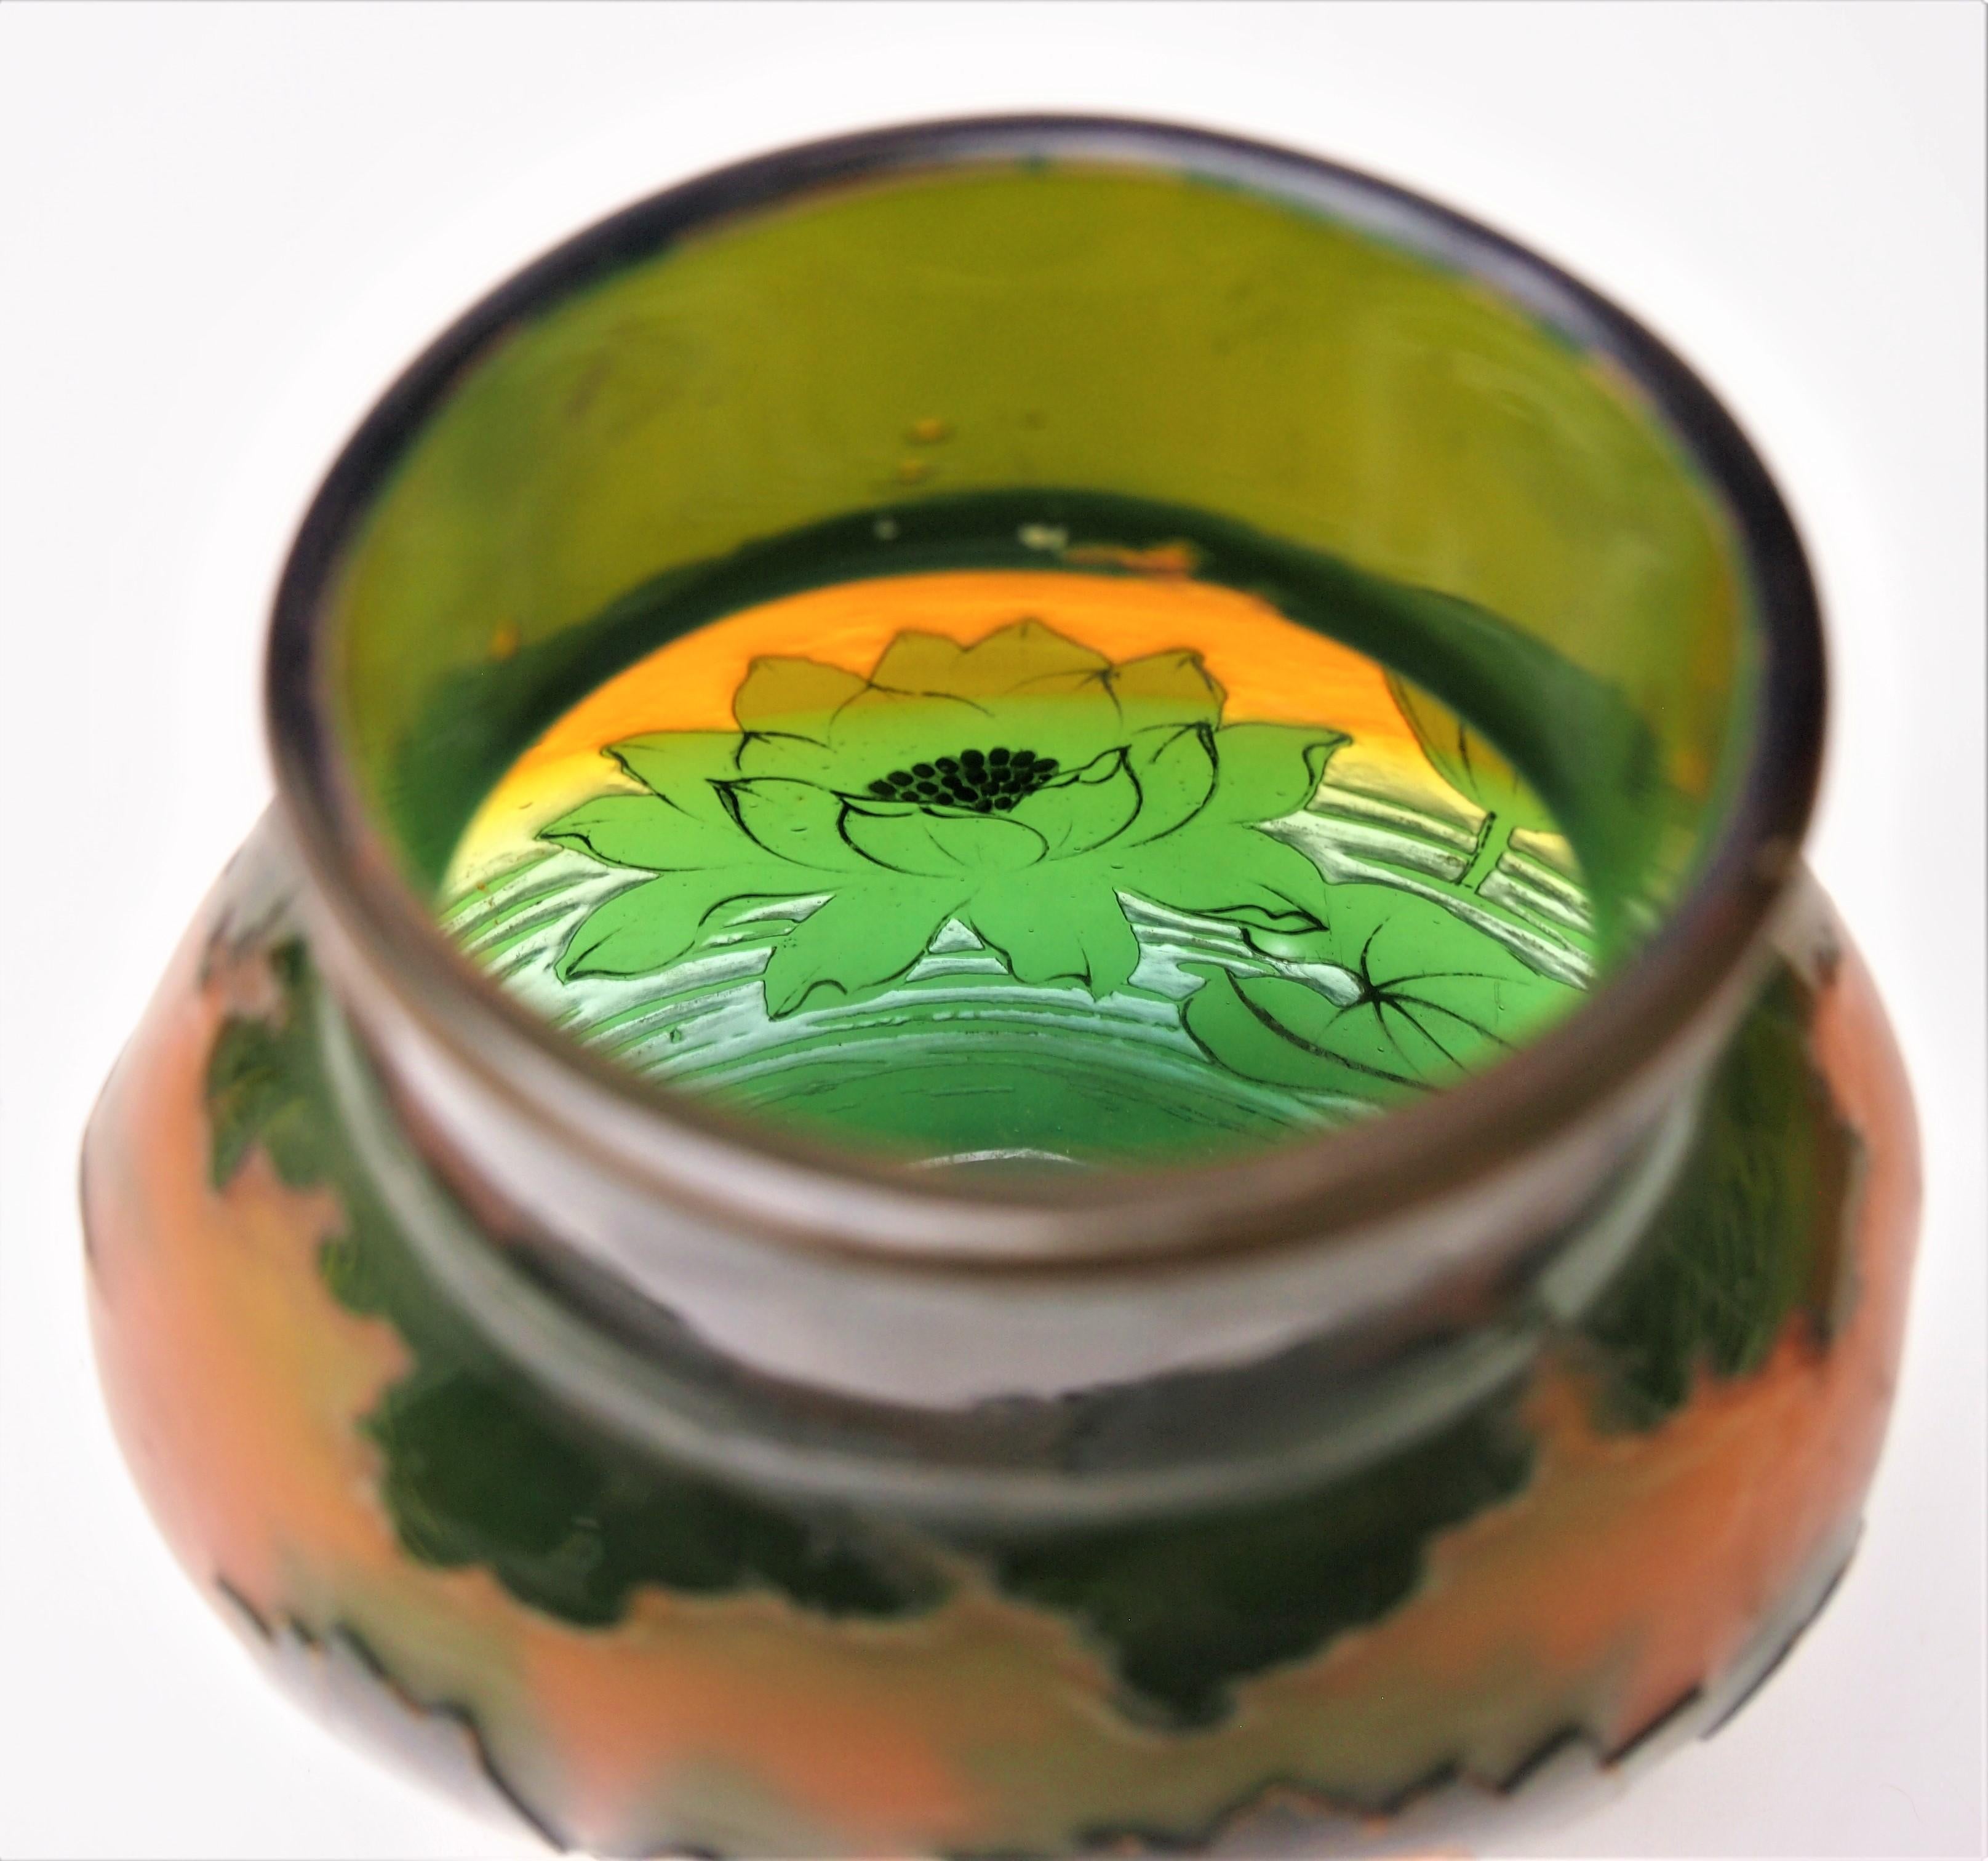 Early 20th Century Harrach Waterlily Cameo Vase green over opal orange glass gilded c1900